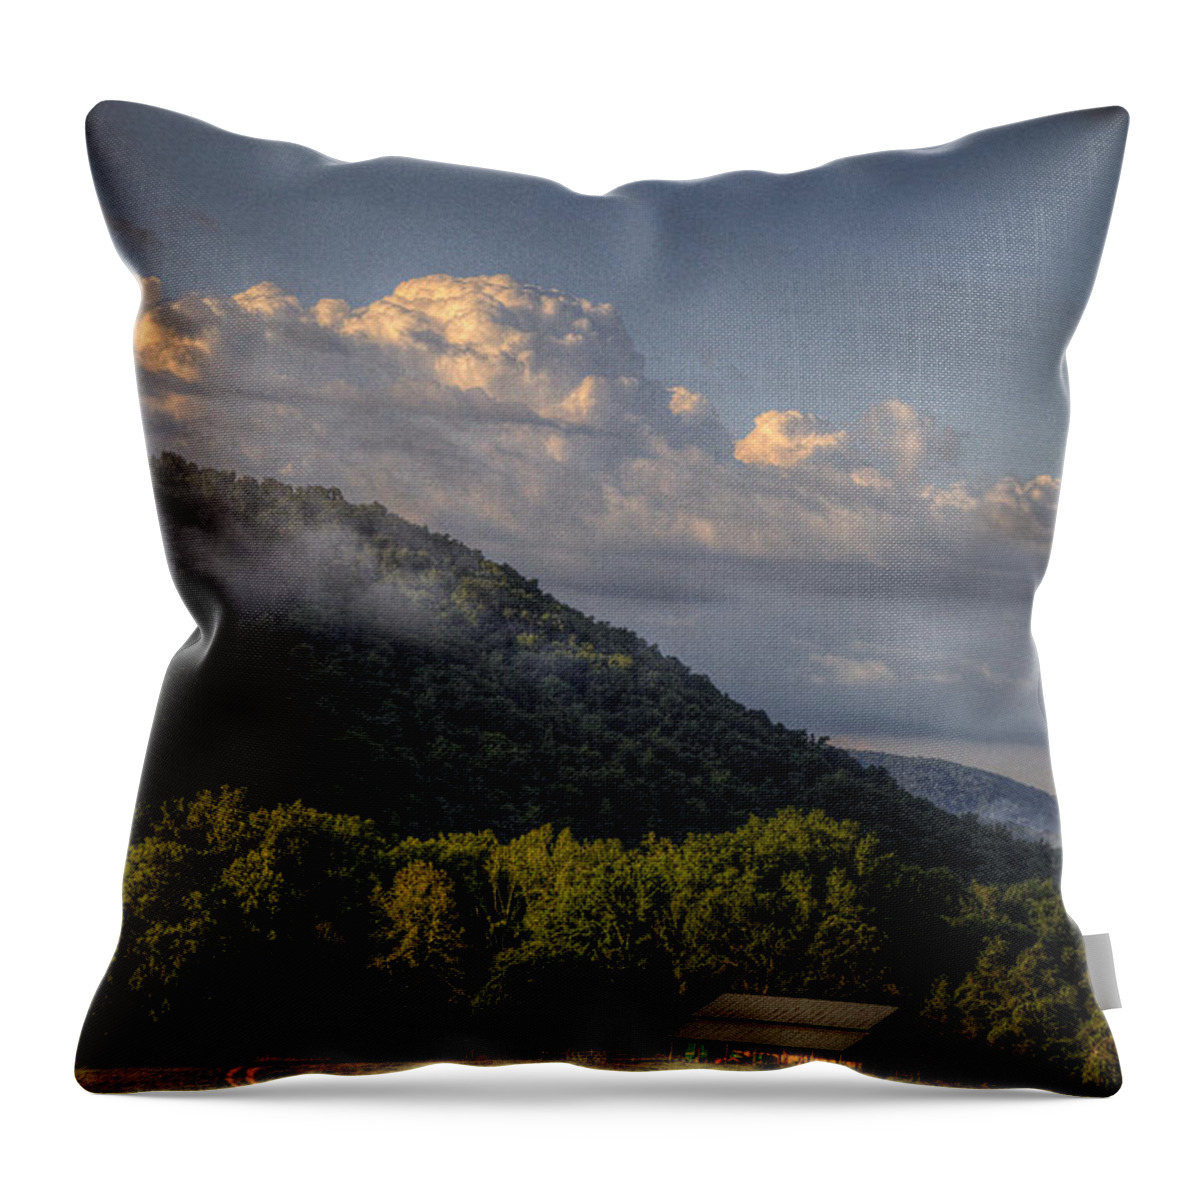 Landscape Throw Pillow featuring the photograph Boxley Valley Barn by Michael Dougherty